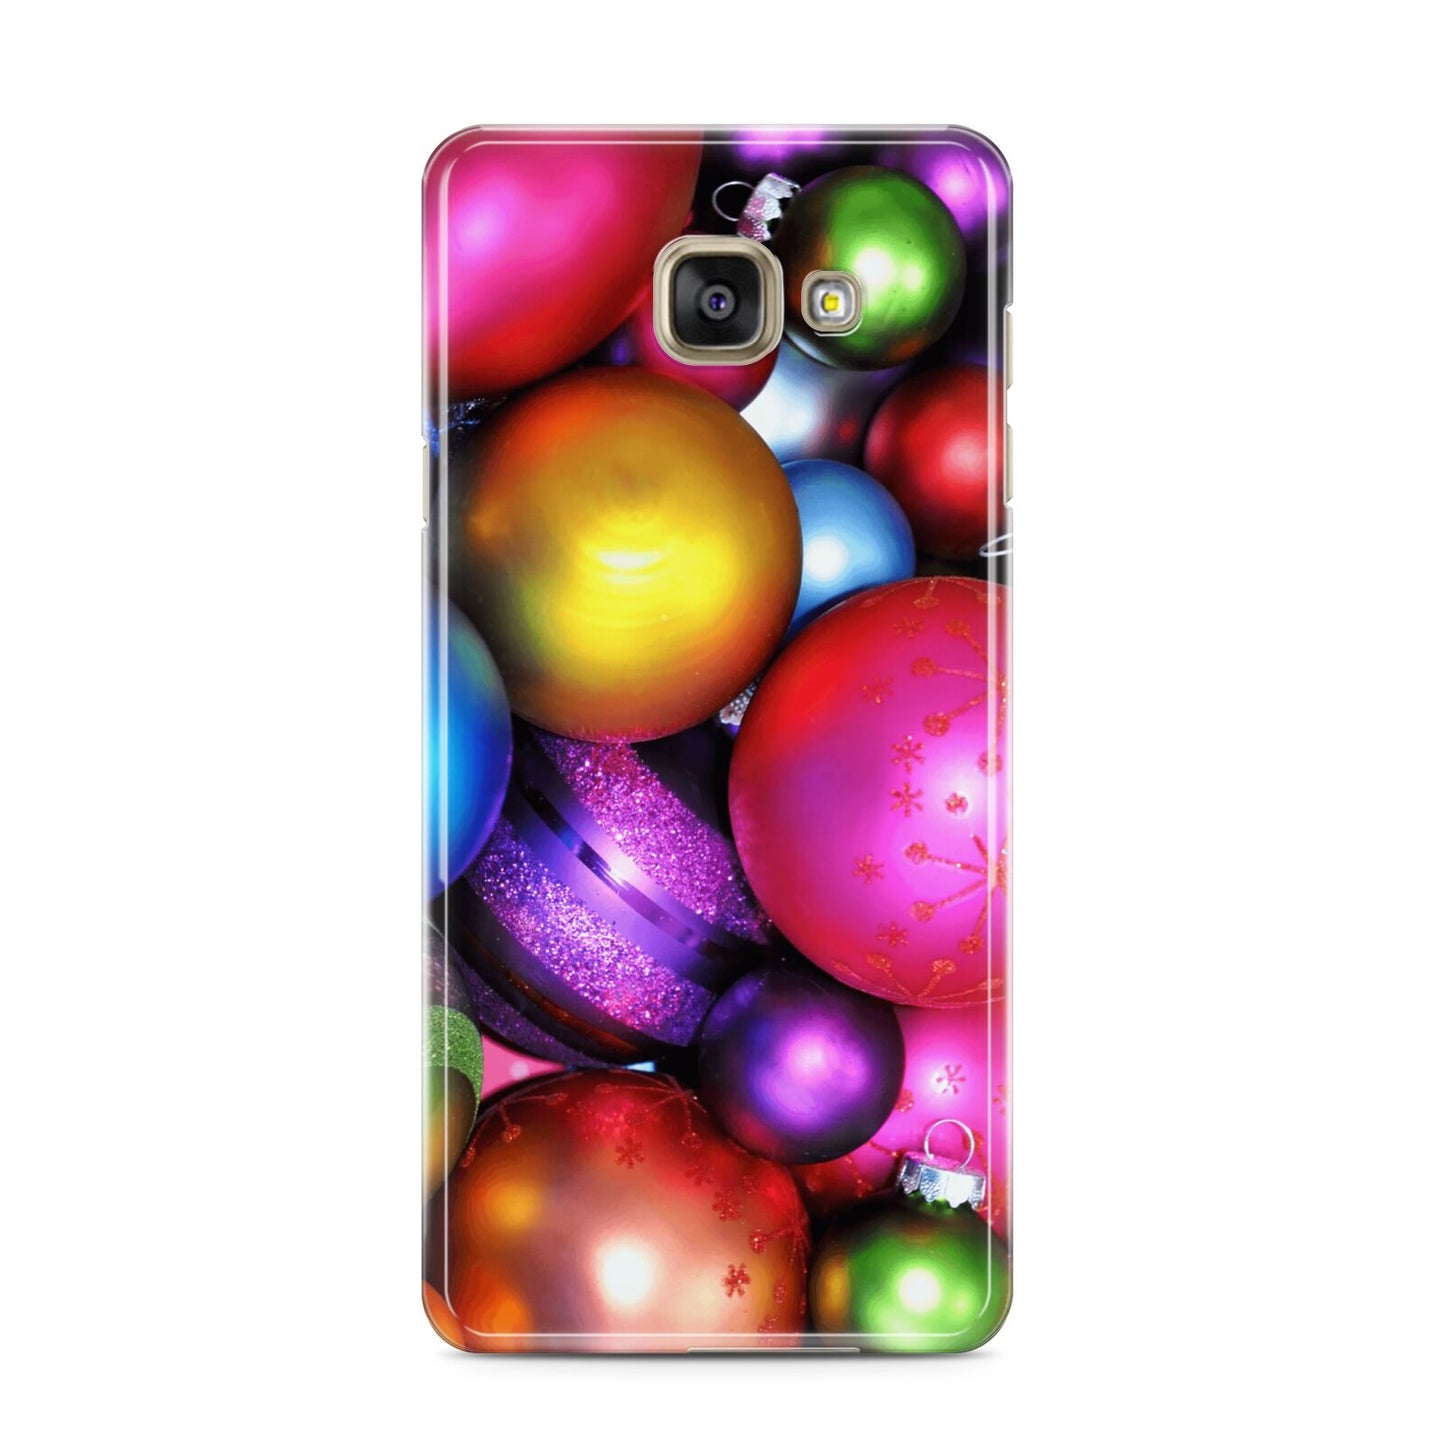 Bauble Samsung Galaxy A3 2016 Case on gold phone